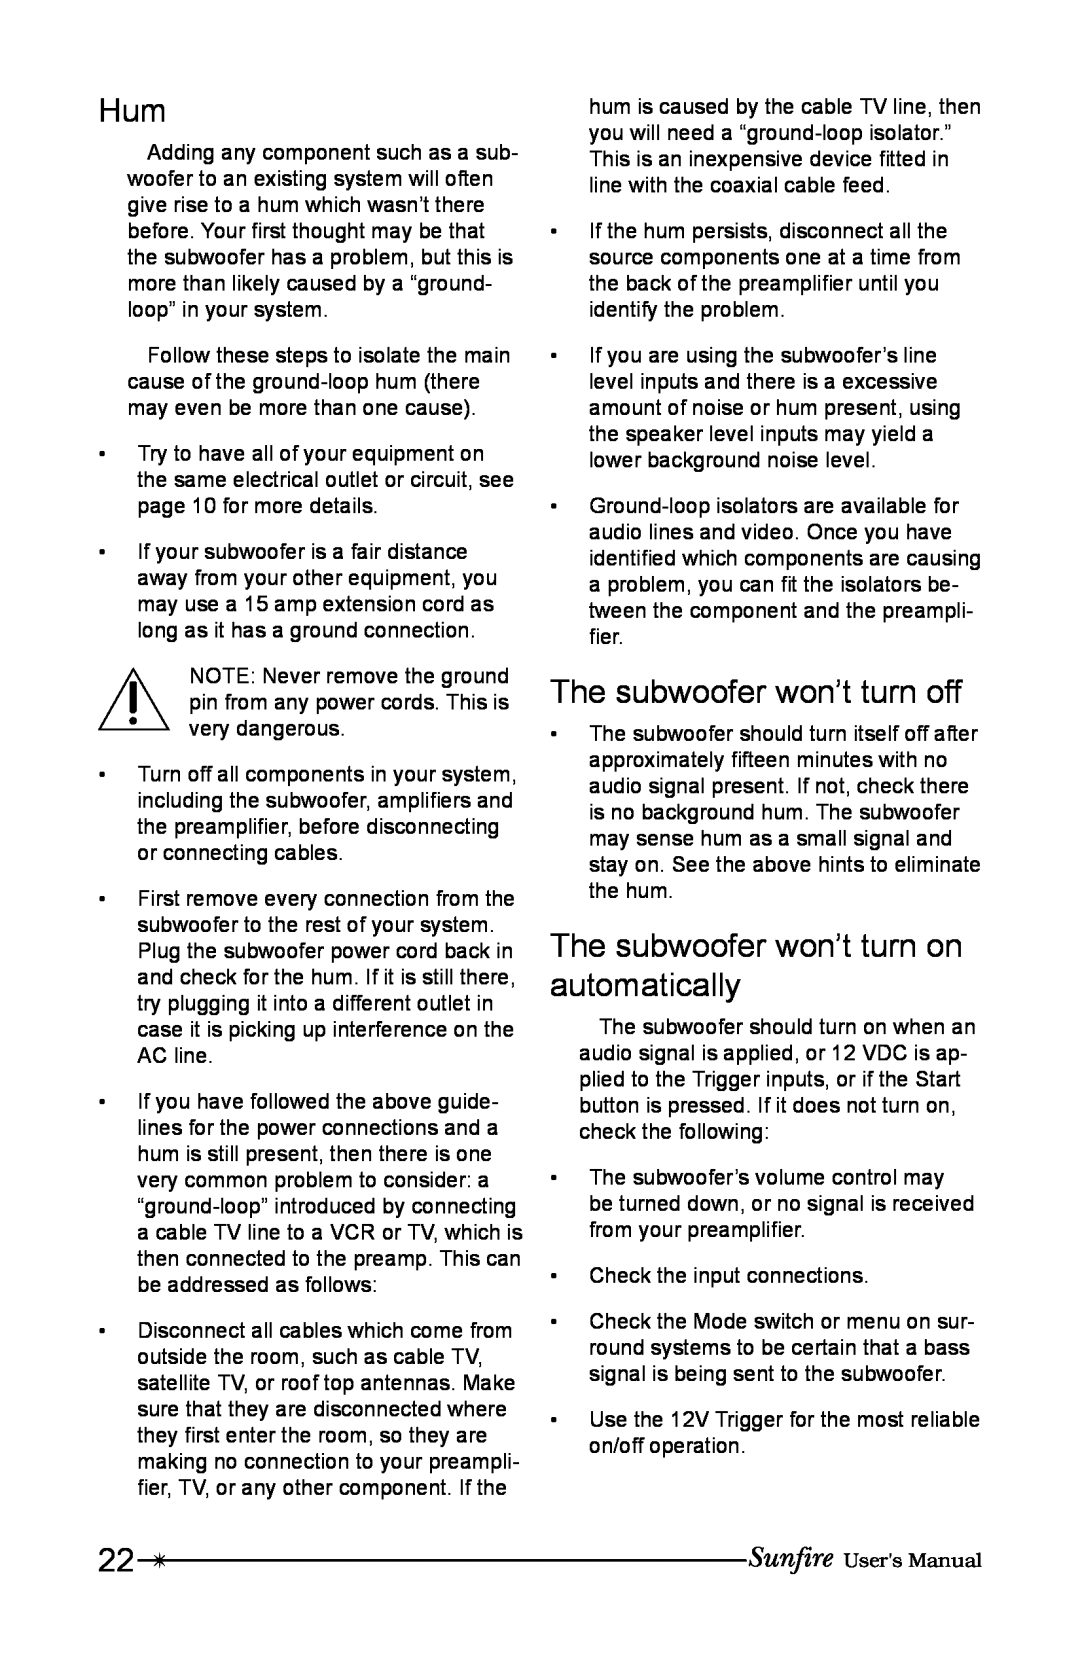 Sunfire 12 user manual The subwoofer won’t turn off, The subwoofer won’t turn on automatically 